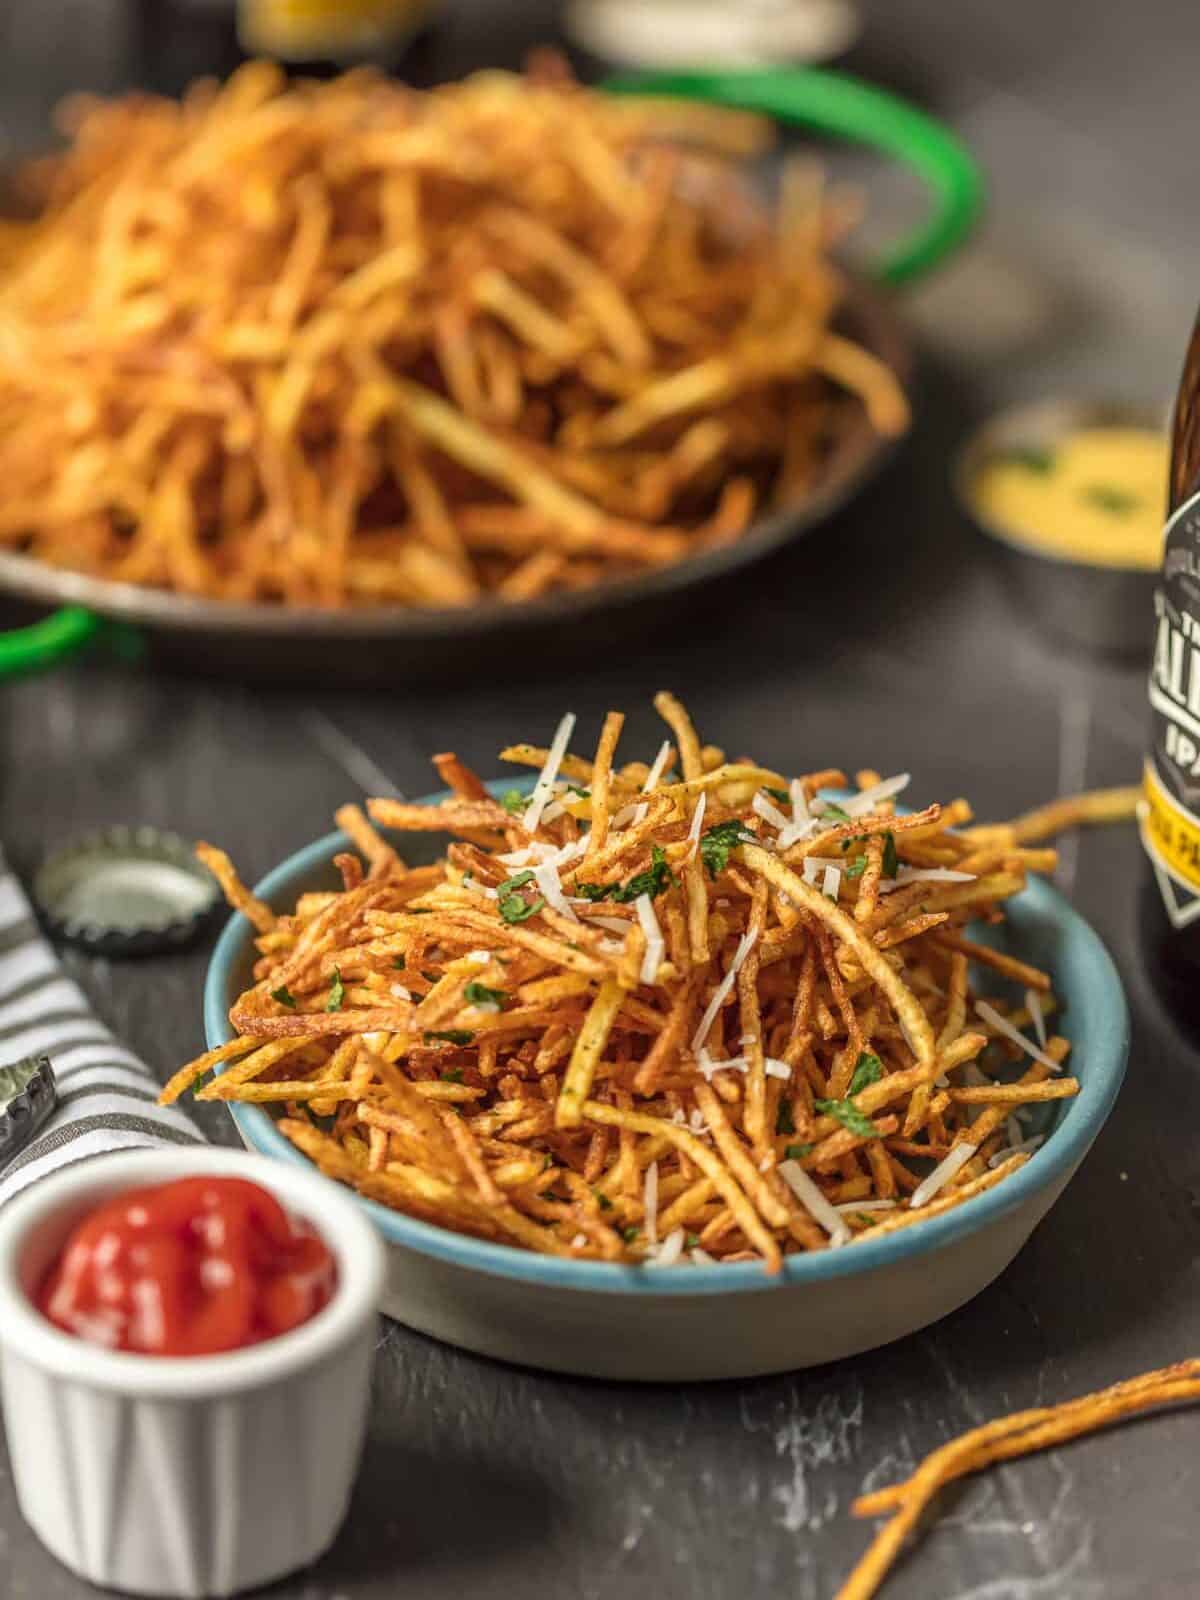 Shoestring Fries topped with Parmesan and garlic.